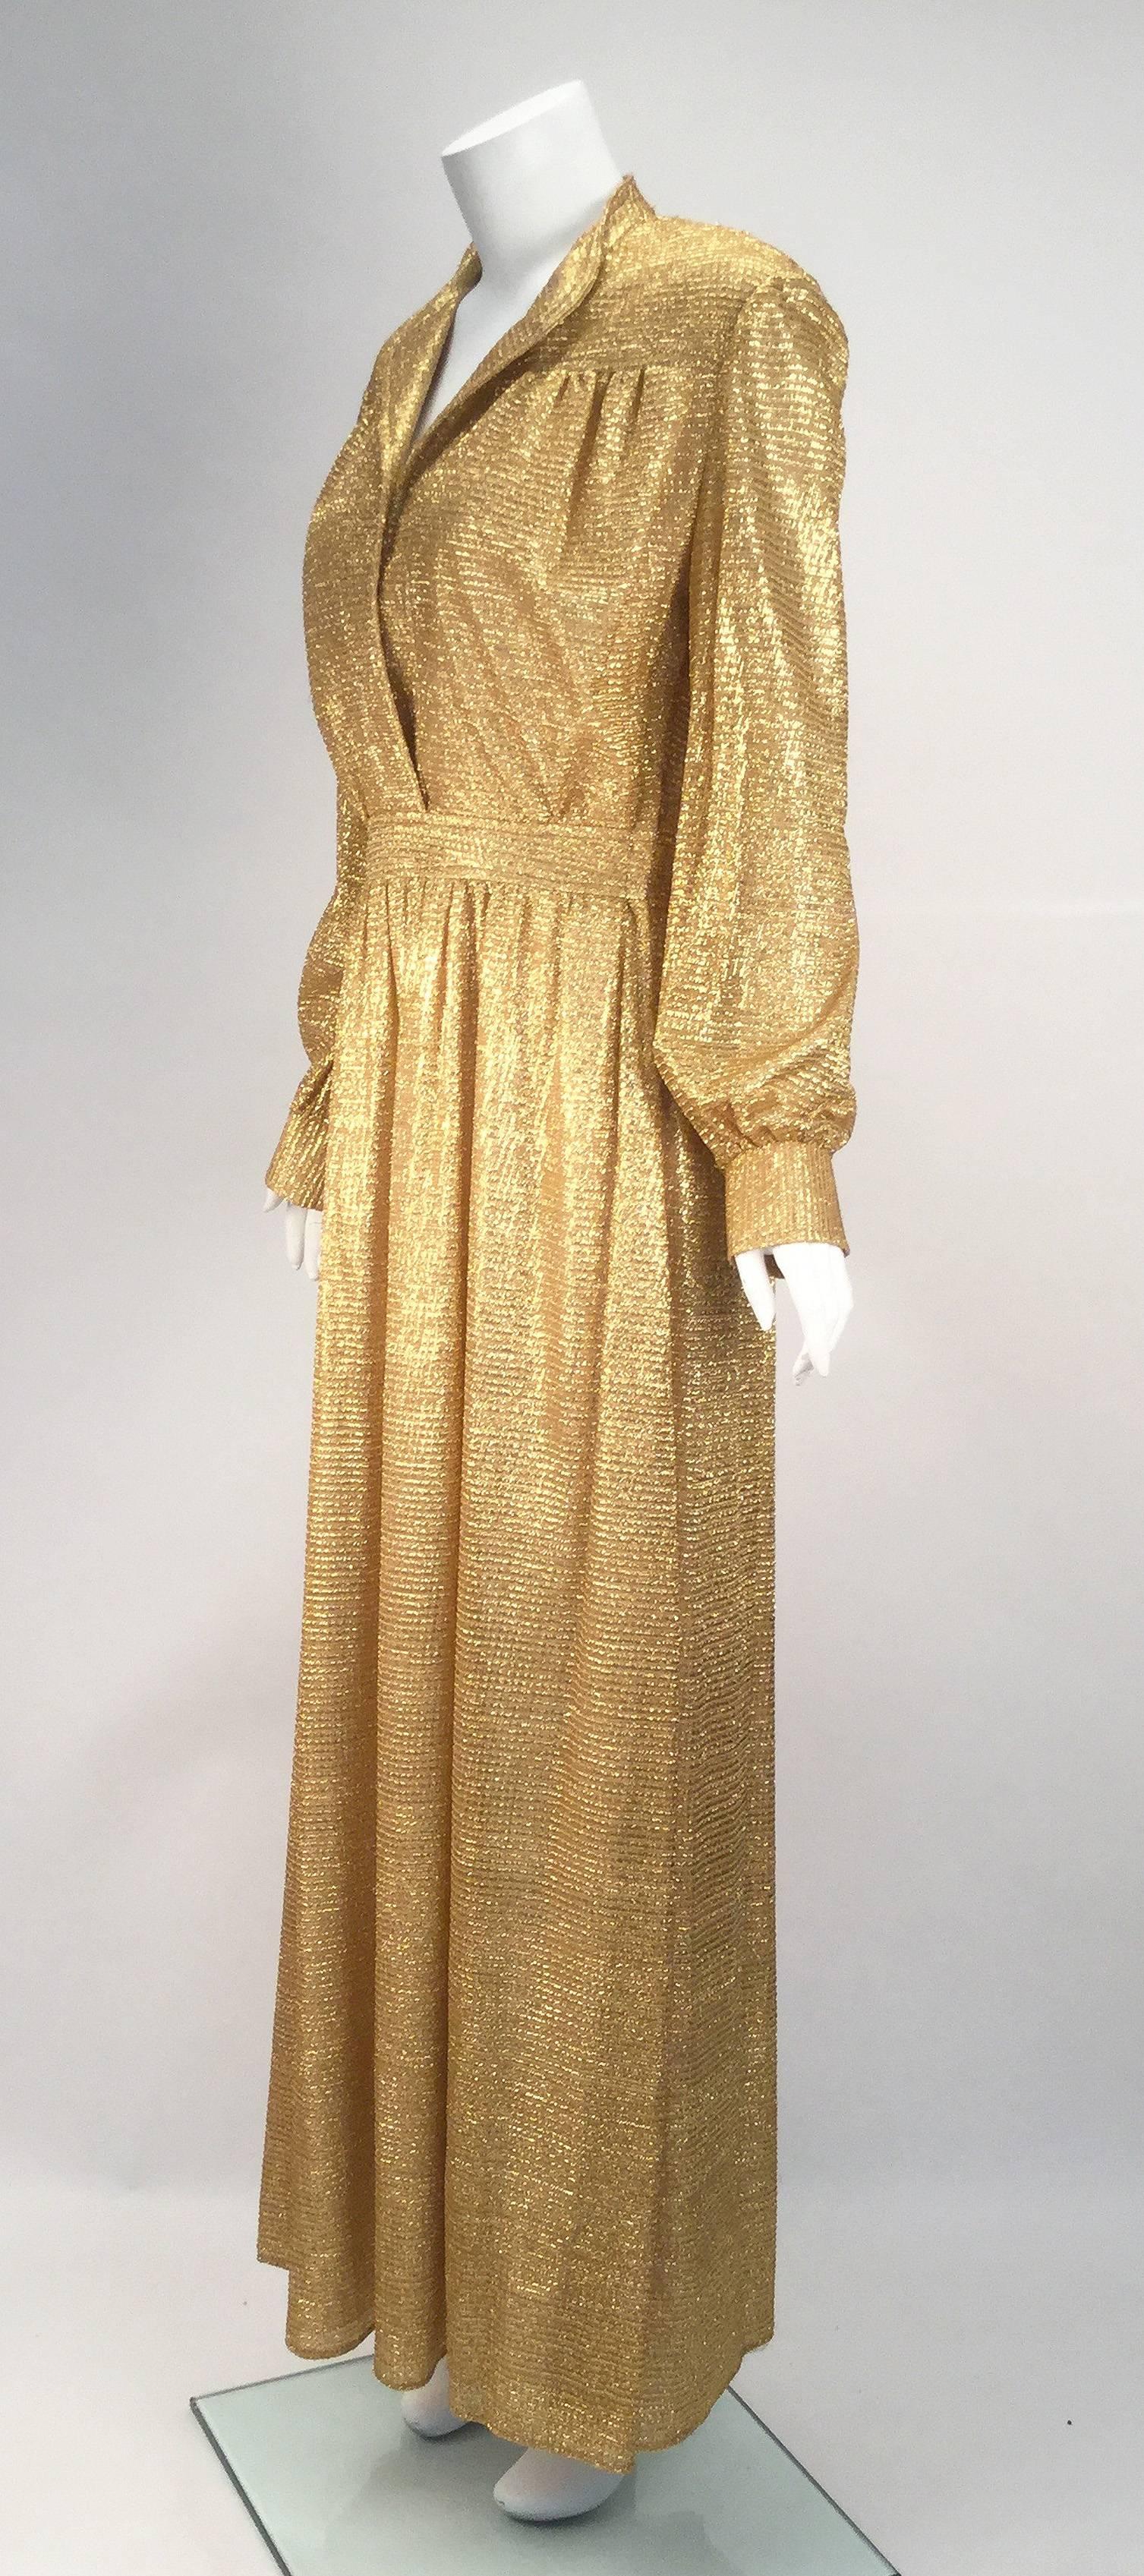 Gorgeous 1970's gold metallic long sleeve maxi dress. Dress up or down, this dress has a stand up collar with center front placket that is open and overlapped down to the waist. Waistband with gathered skirt. Cuffed long sleeves. Bodice and skirt